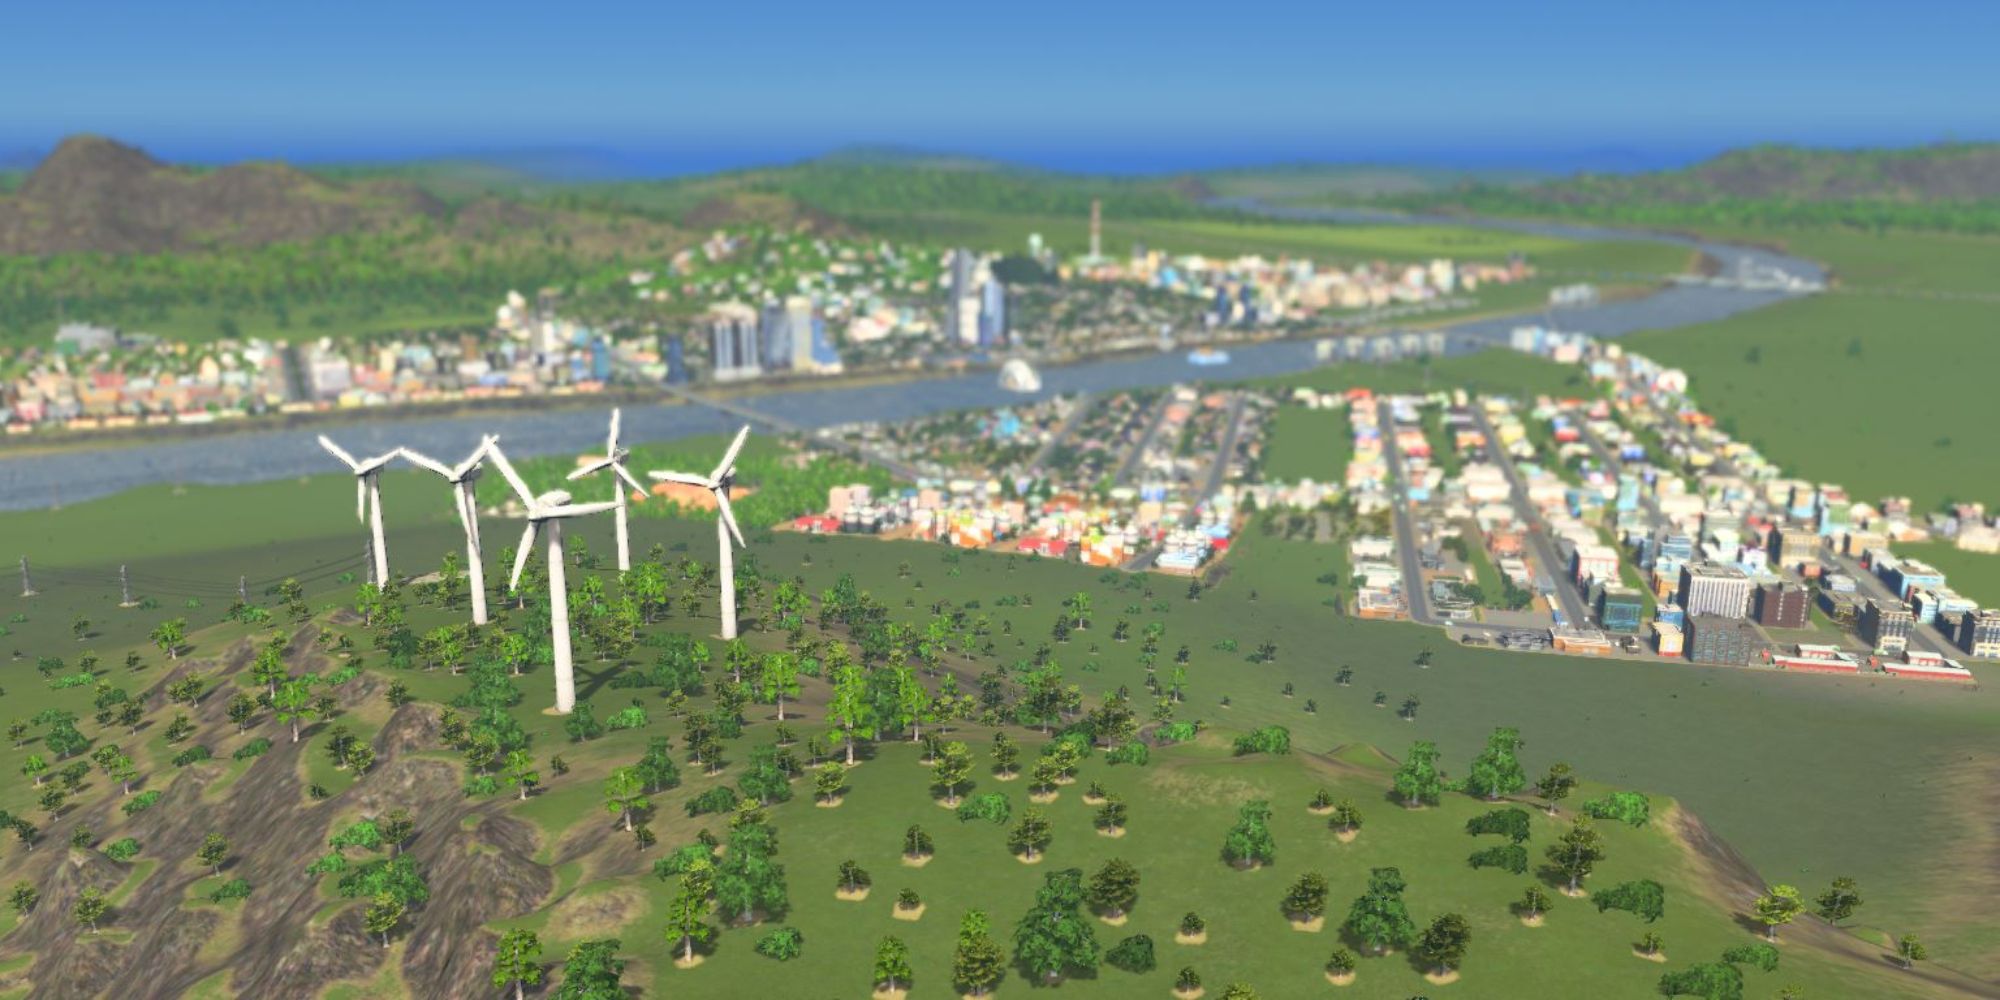 An image from Cities: Skylines of several wind turbines during the Green Power scenario, which requires you to power the city without using polluting industries.